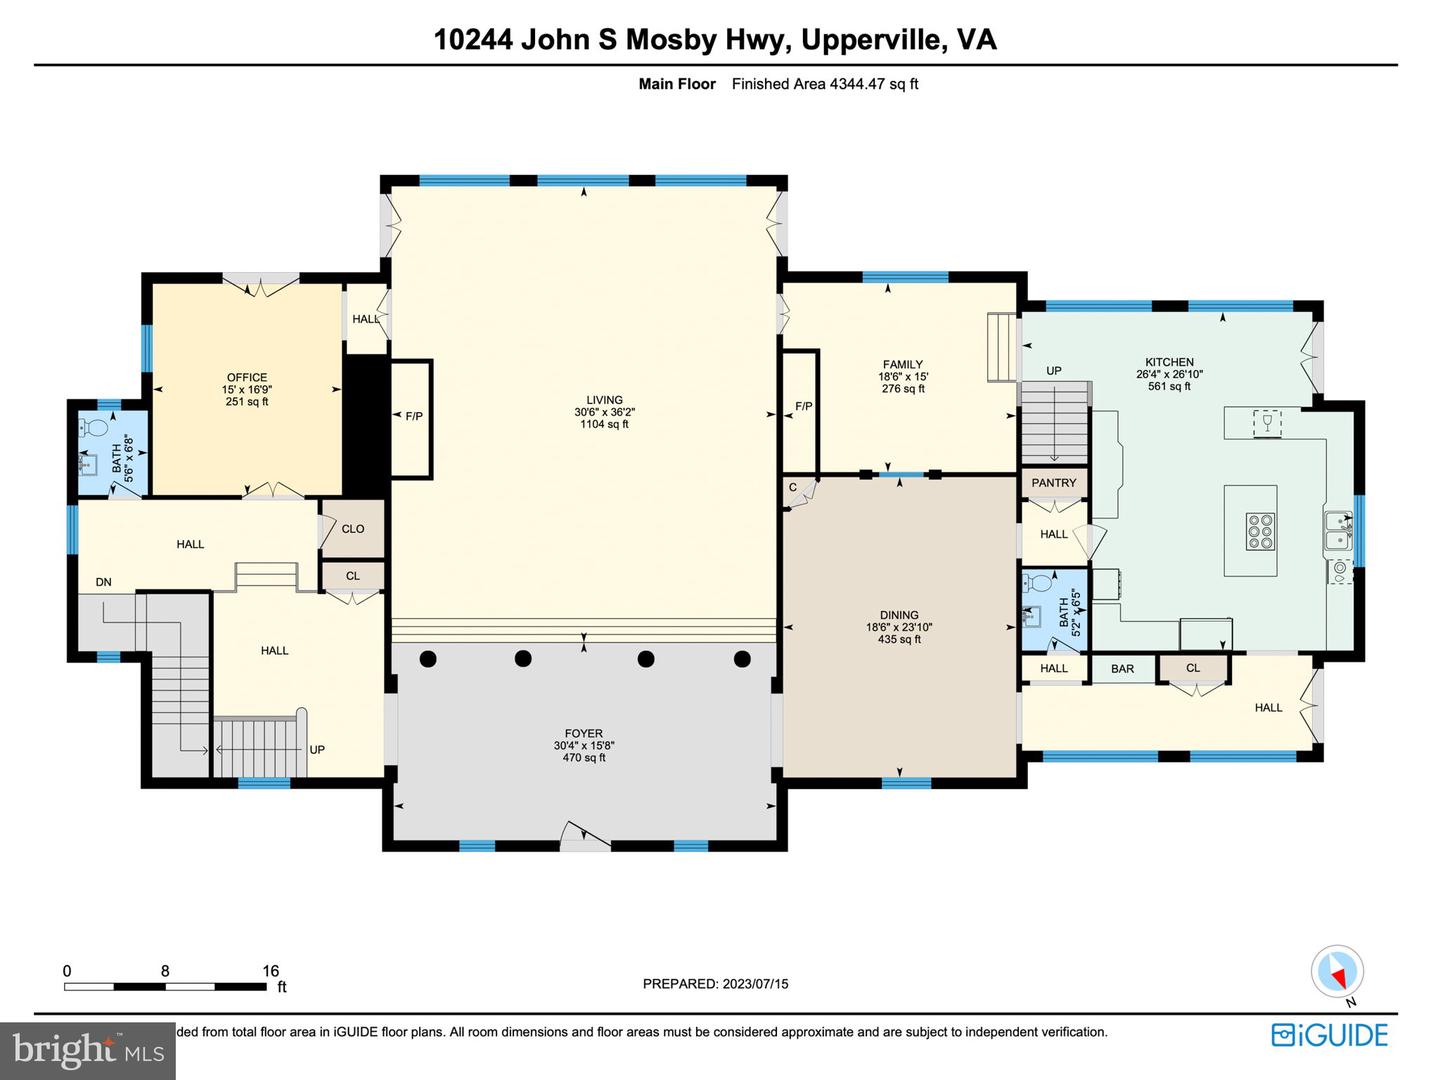 10244 JOHN S MOSBY HWY, UPPERVILLE, Virginia 20184, 5 Bedrooms Bedrooms, ,4 BathroomsBathrooms,Residential,For sale,10244 JOHN S MOSBY HWY,VALO2054174 MLS # VALO2054174